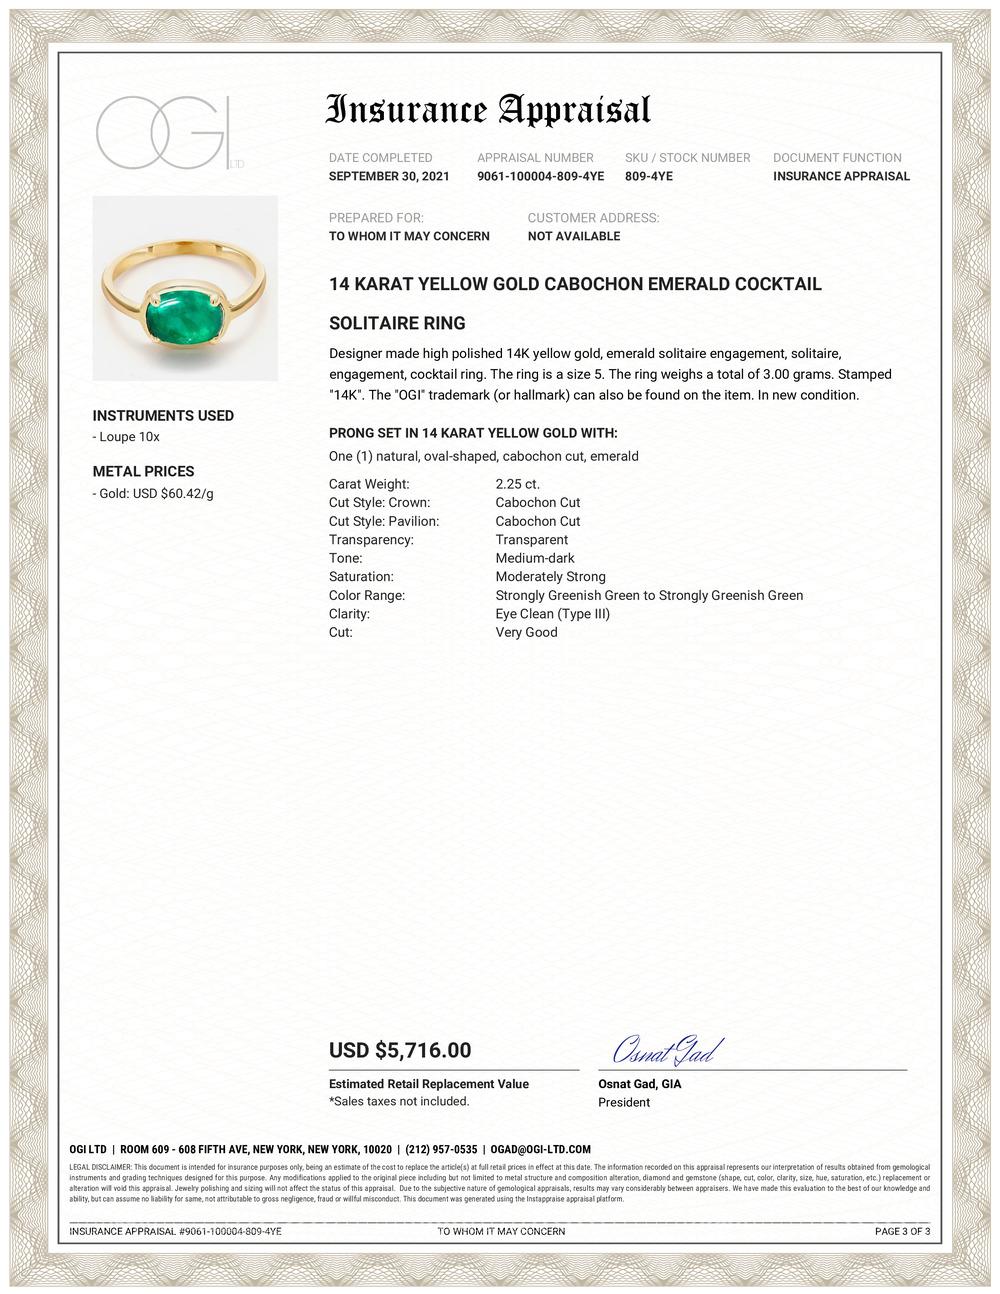 Fourteen karats yellow gold ring
Cabochon emerald weighing 2.25 carat                                                                      
Ring size 5 In Stock
The ring can be resized 
New Ring
Handmade in the USA
Our design team select gemstones